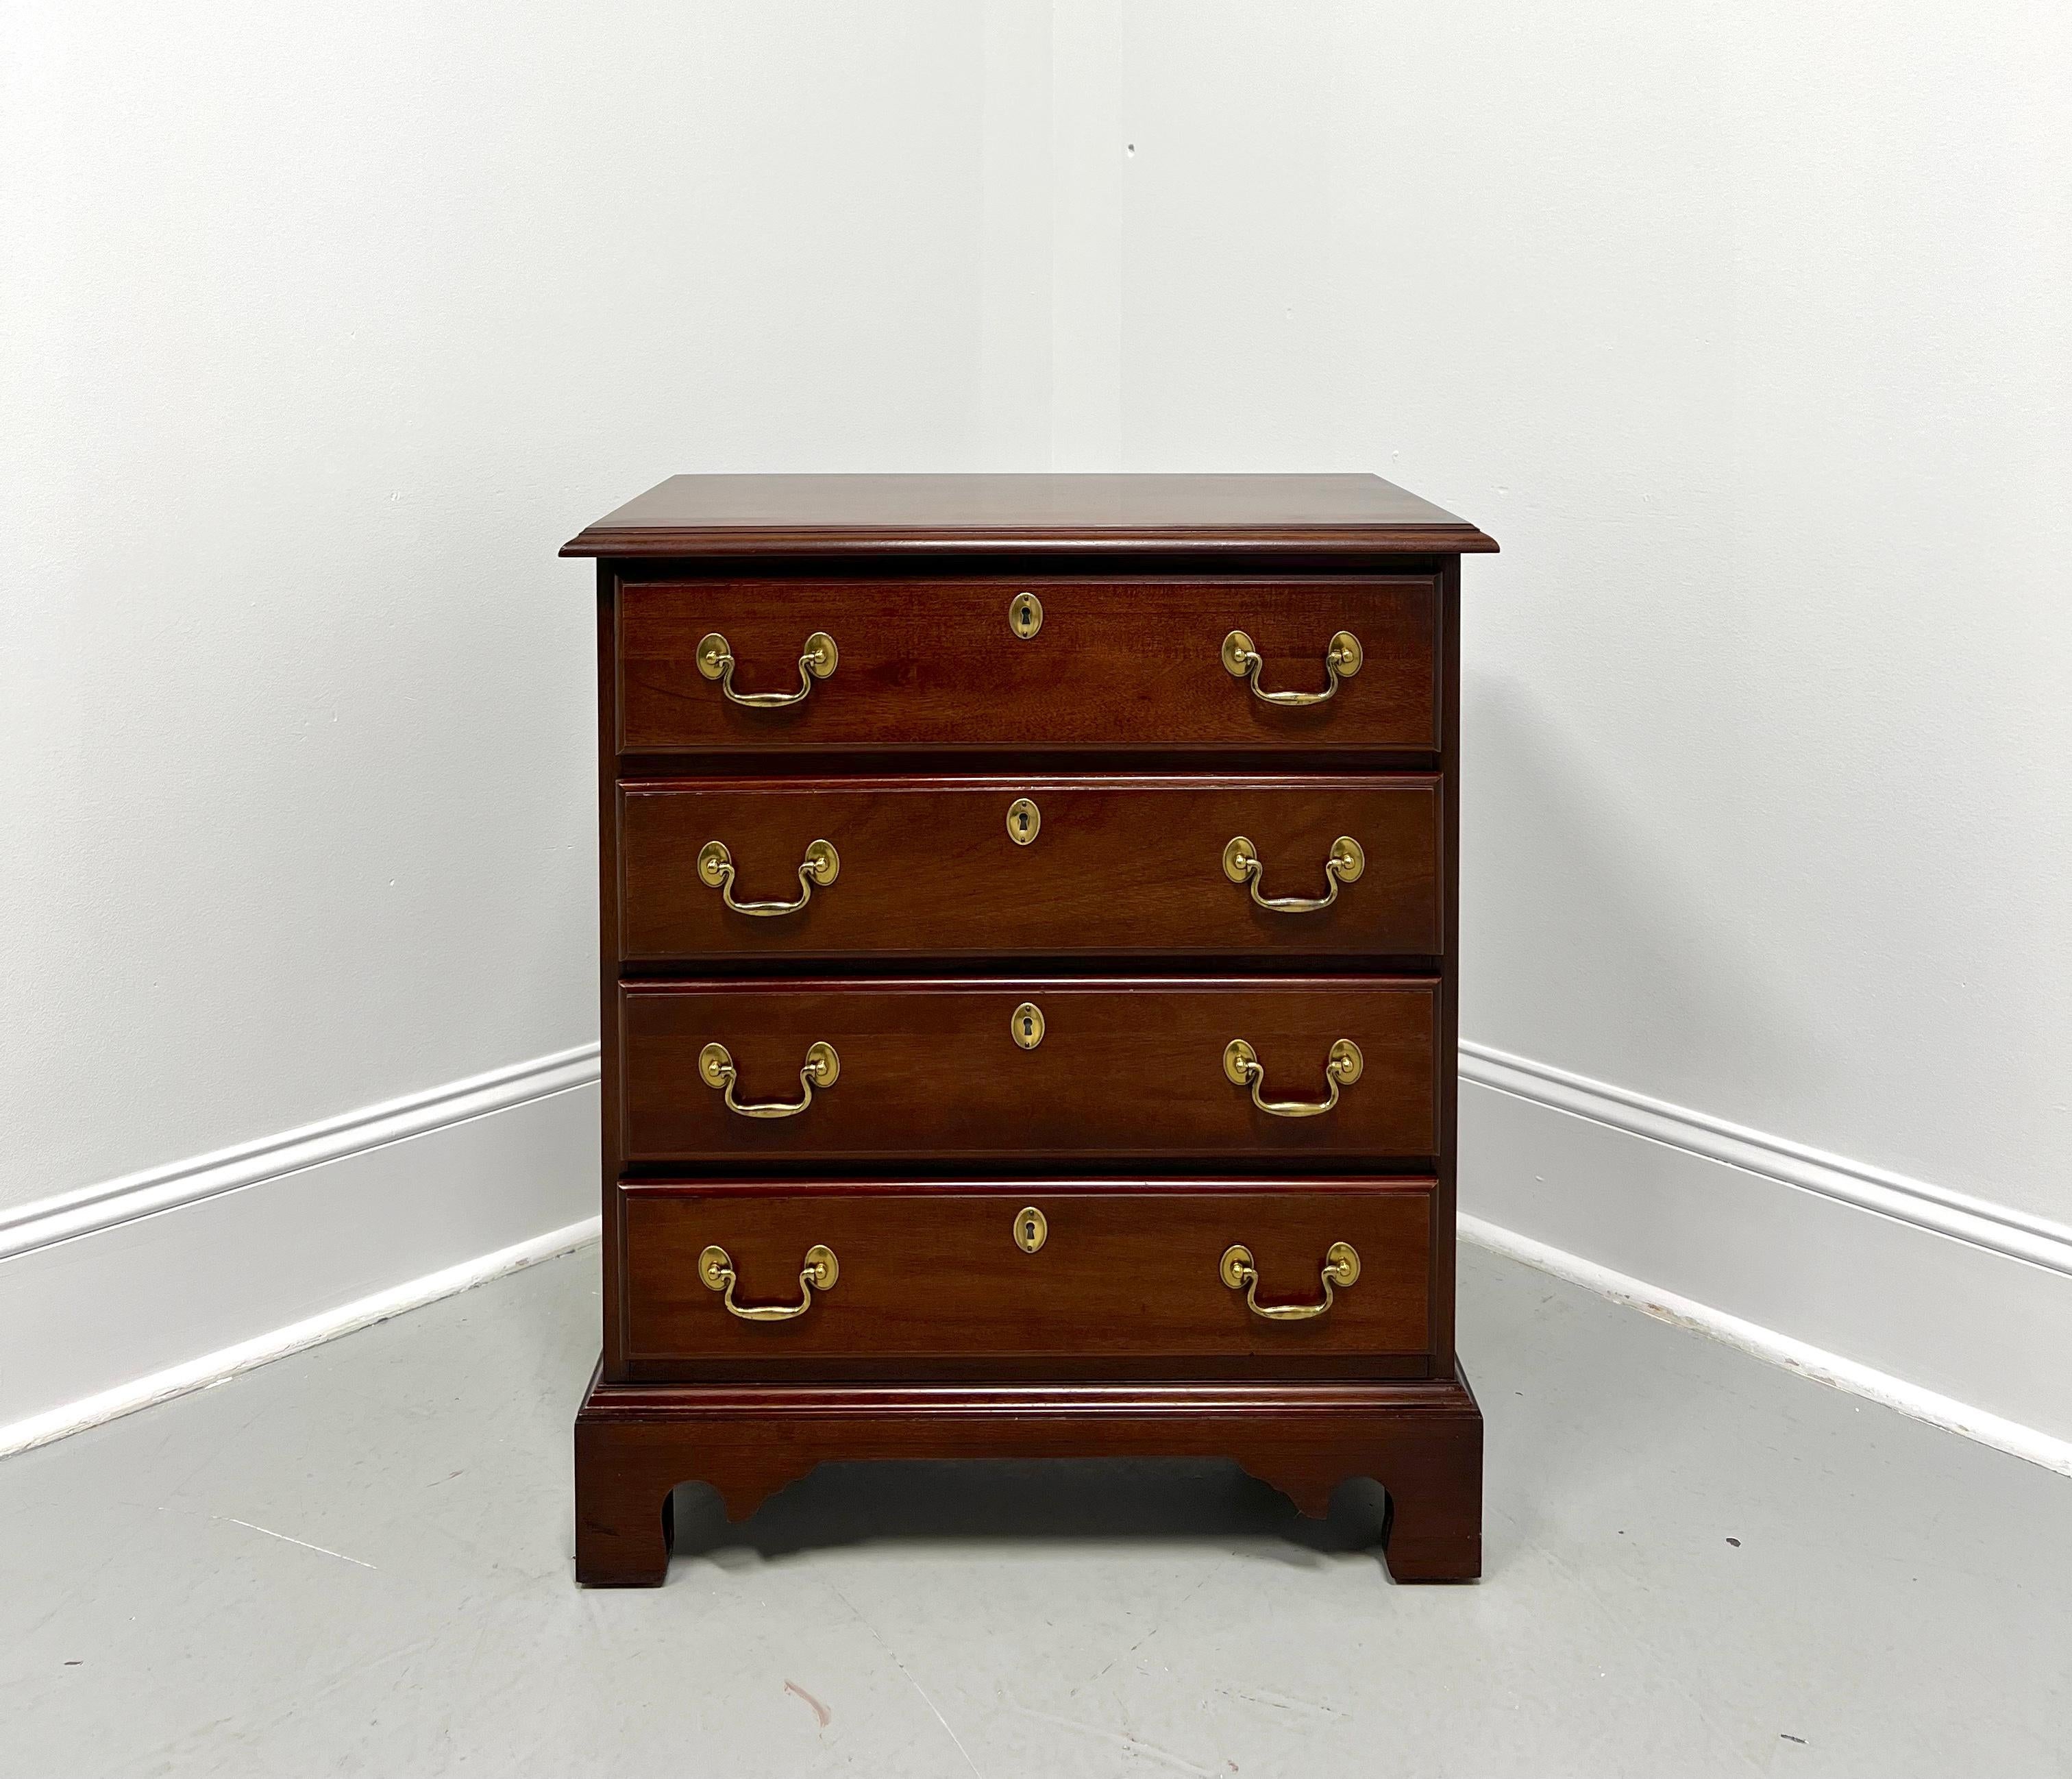 A Chippendale style bedside chest by White Furniture. Mahogany with brass hardware, ogee edge to the top, brass side handles, and bracket feet. Features four drawers of dovetail construction with faux keyhole escutcheons. Made in the USA, circa